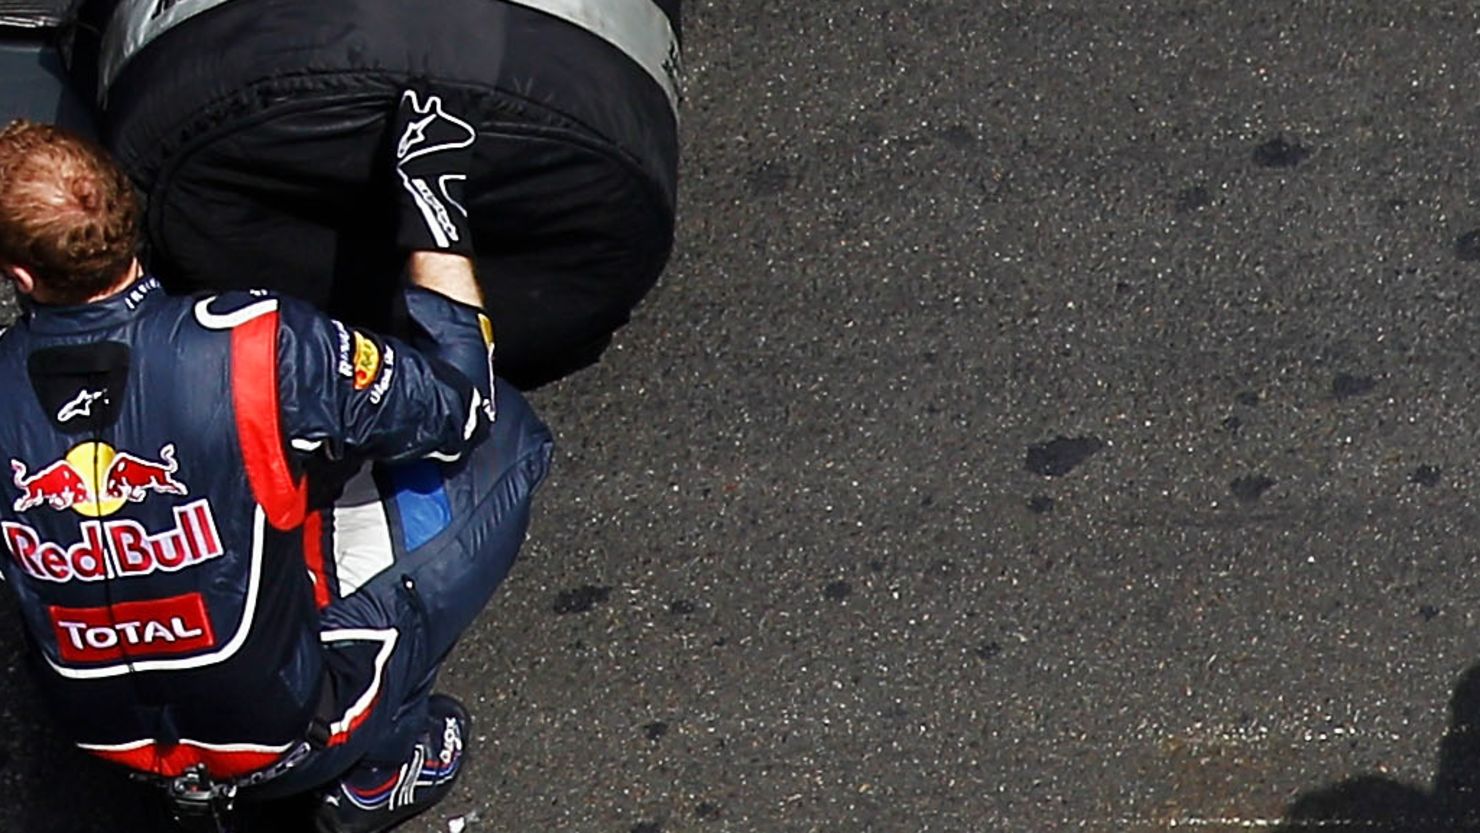 The slot in front of the RB8's rear wheel has been cleared by the FIA's scrutineers.